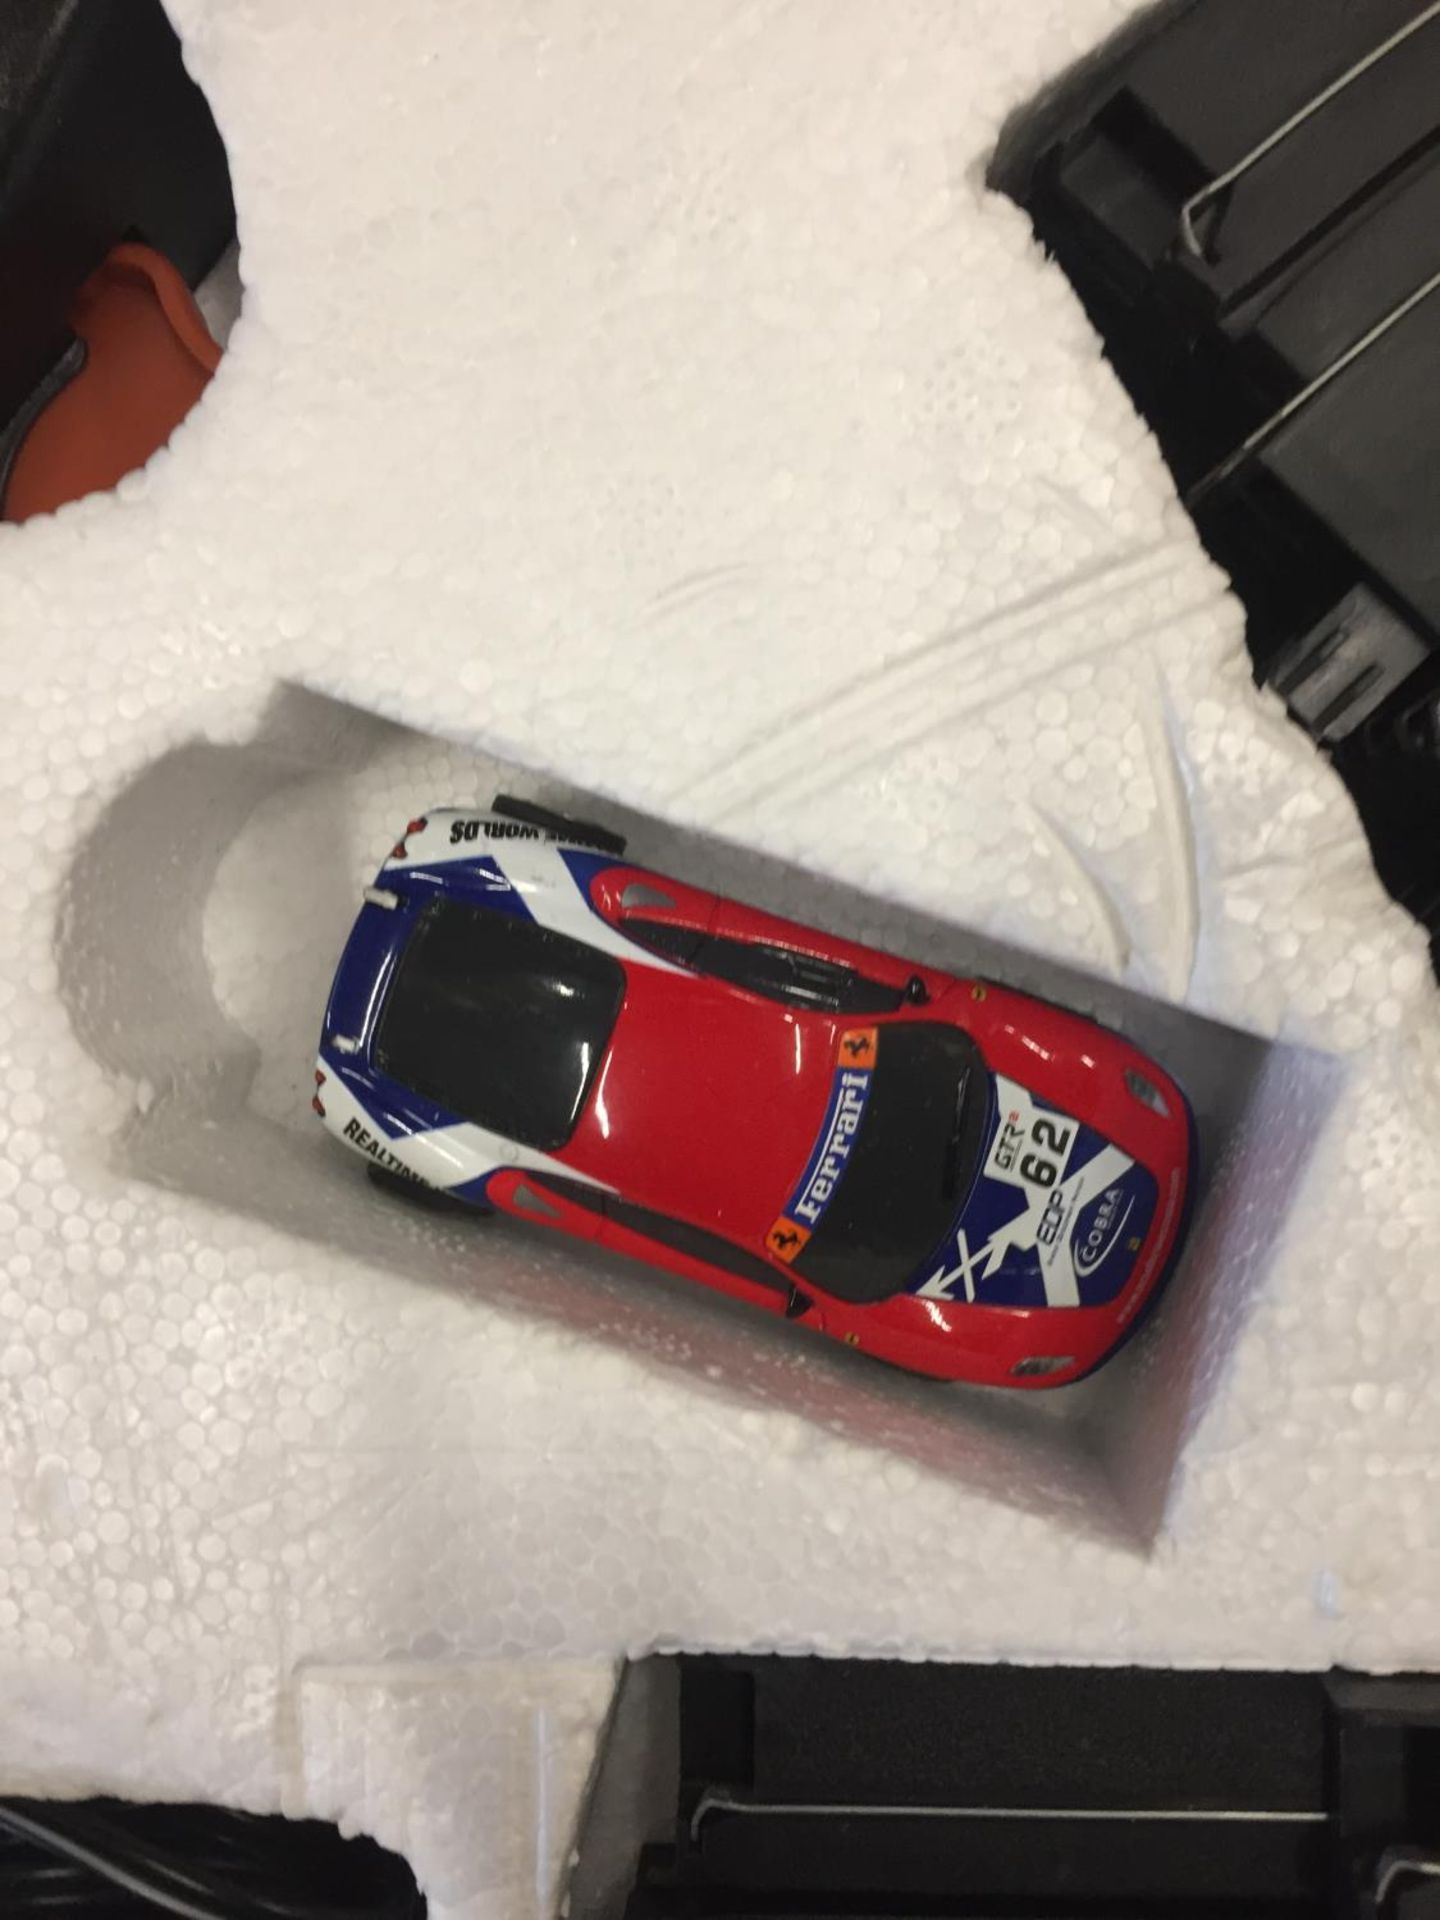 A MICRO SCALEXTRIC RACING SET IN BOX - Image 3 of 5